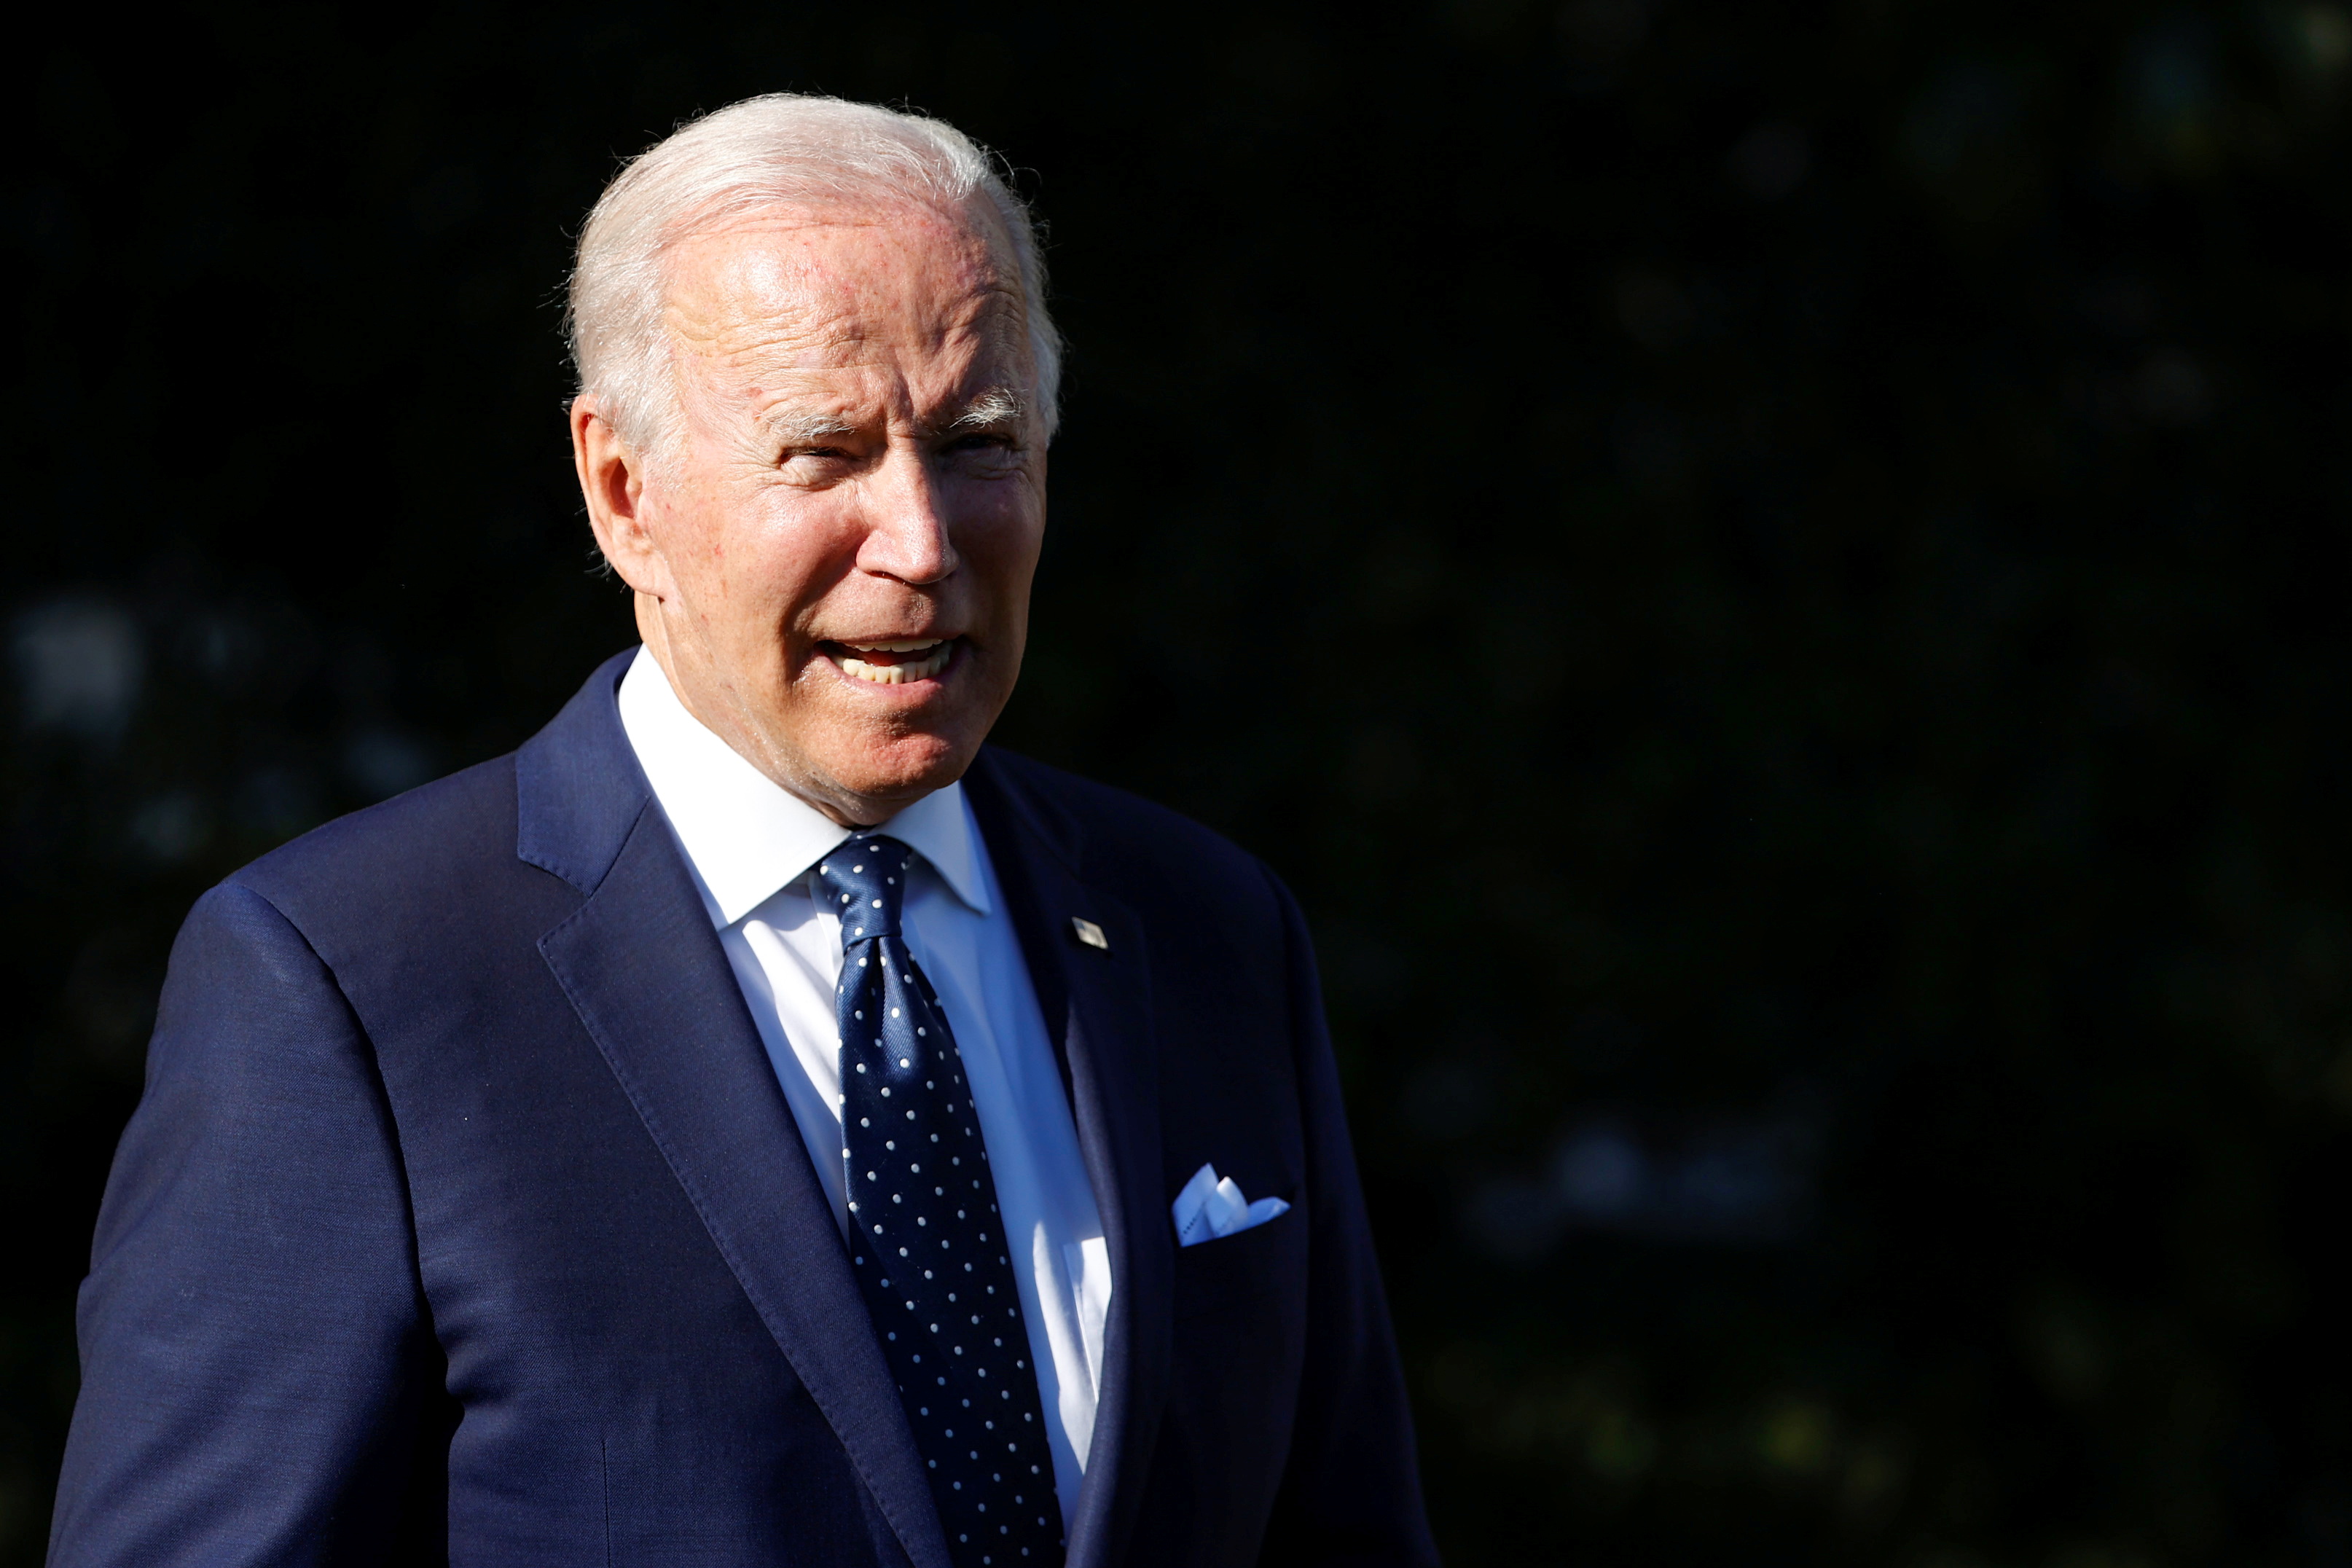 U.S. President Biden speaks briefly with reporters at the White House in Washington